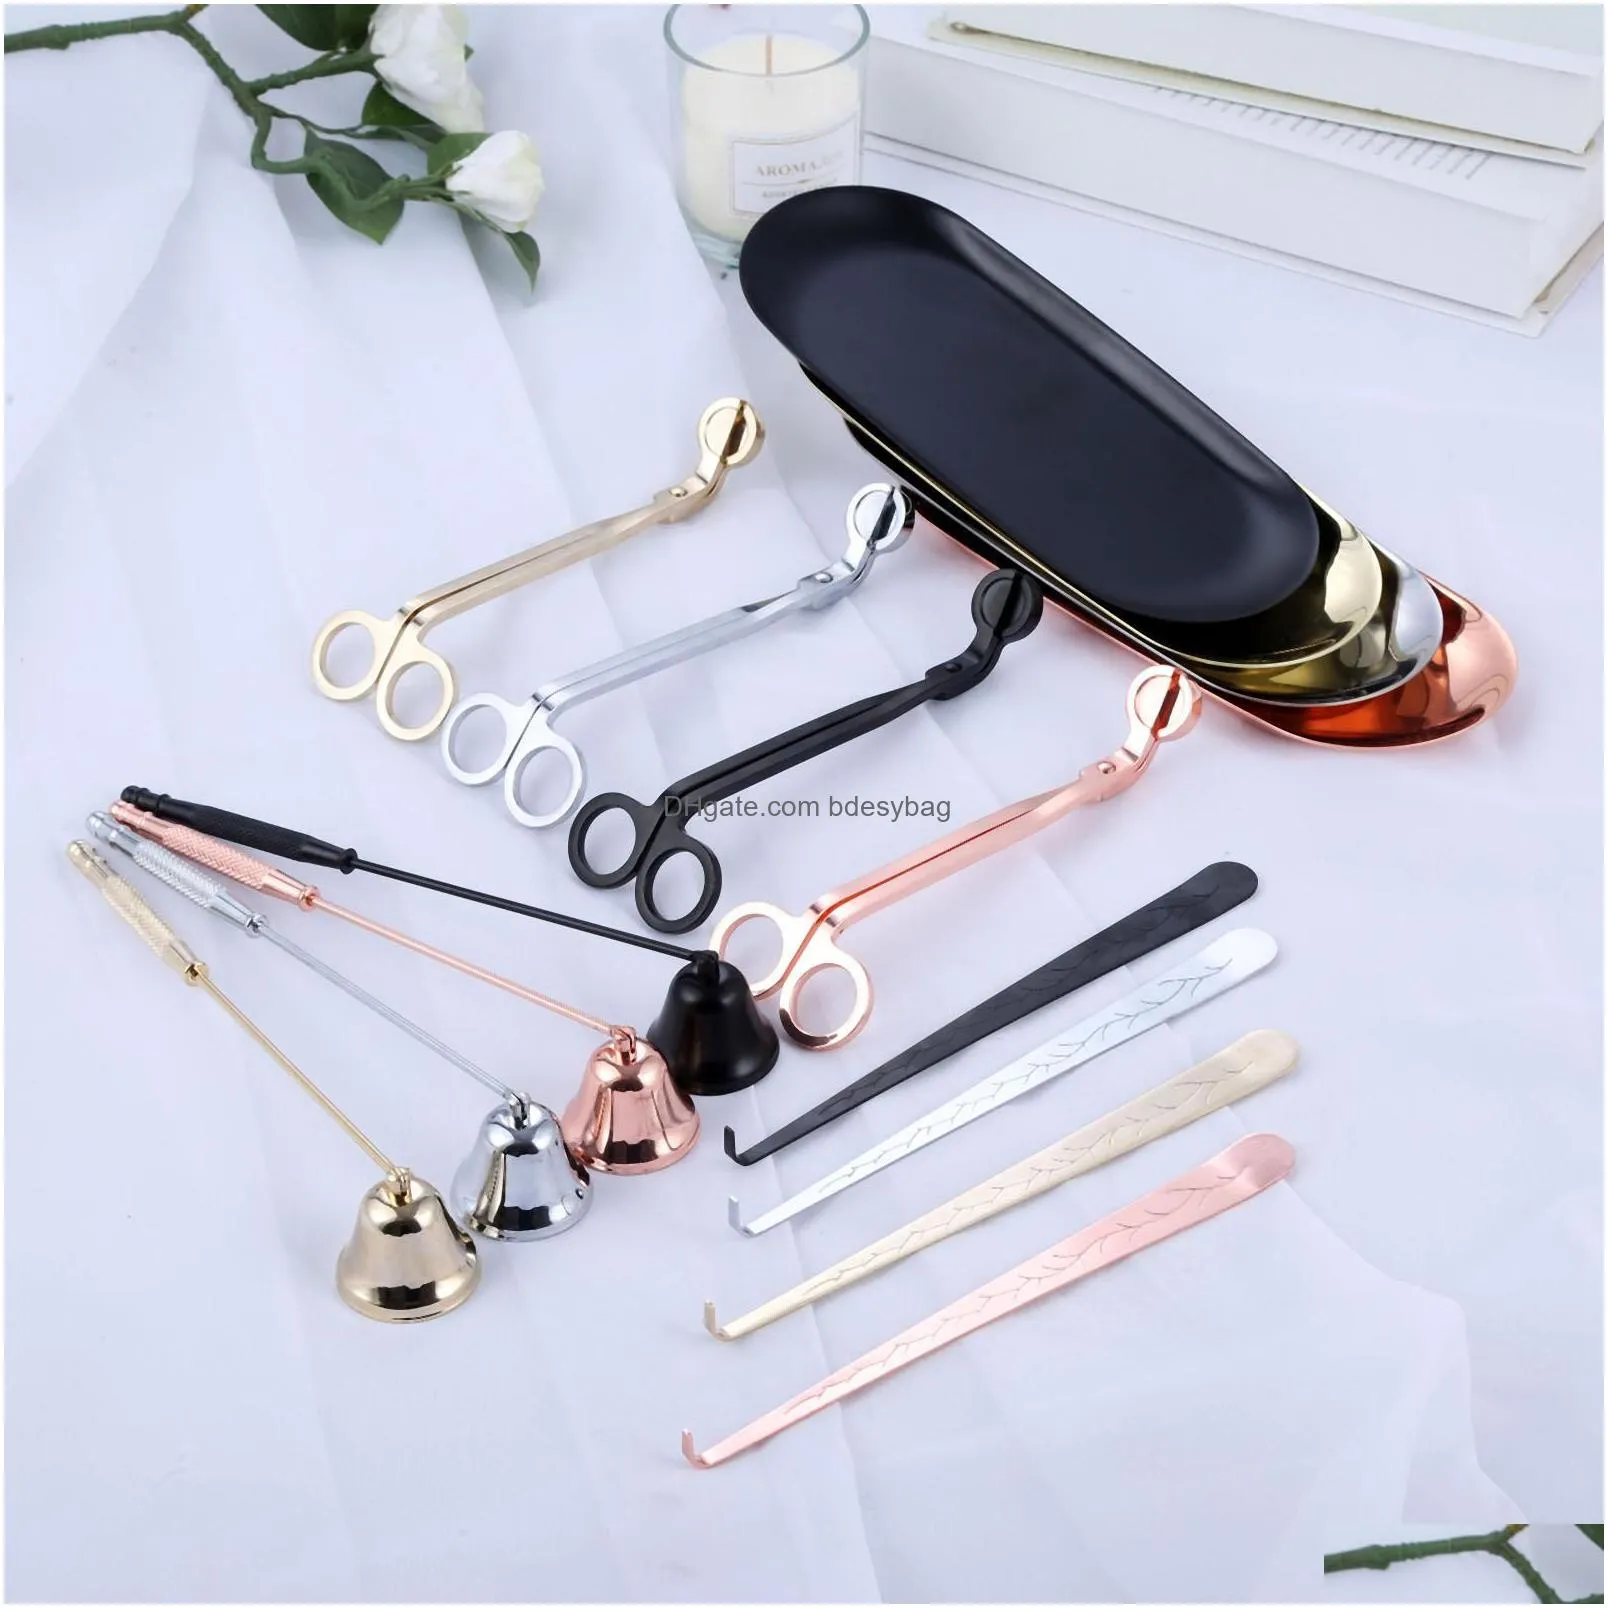 Other Home & Garden 4Pcs/Set Candle Bell Snuffer Wick Trimmer Hook Tray Dipper Scissors Stainless Steel Extinguisher Home Decor Spa To Otoiu